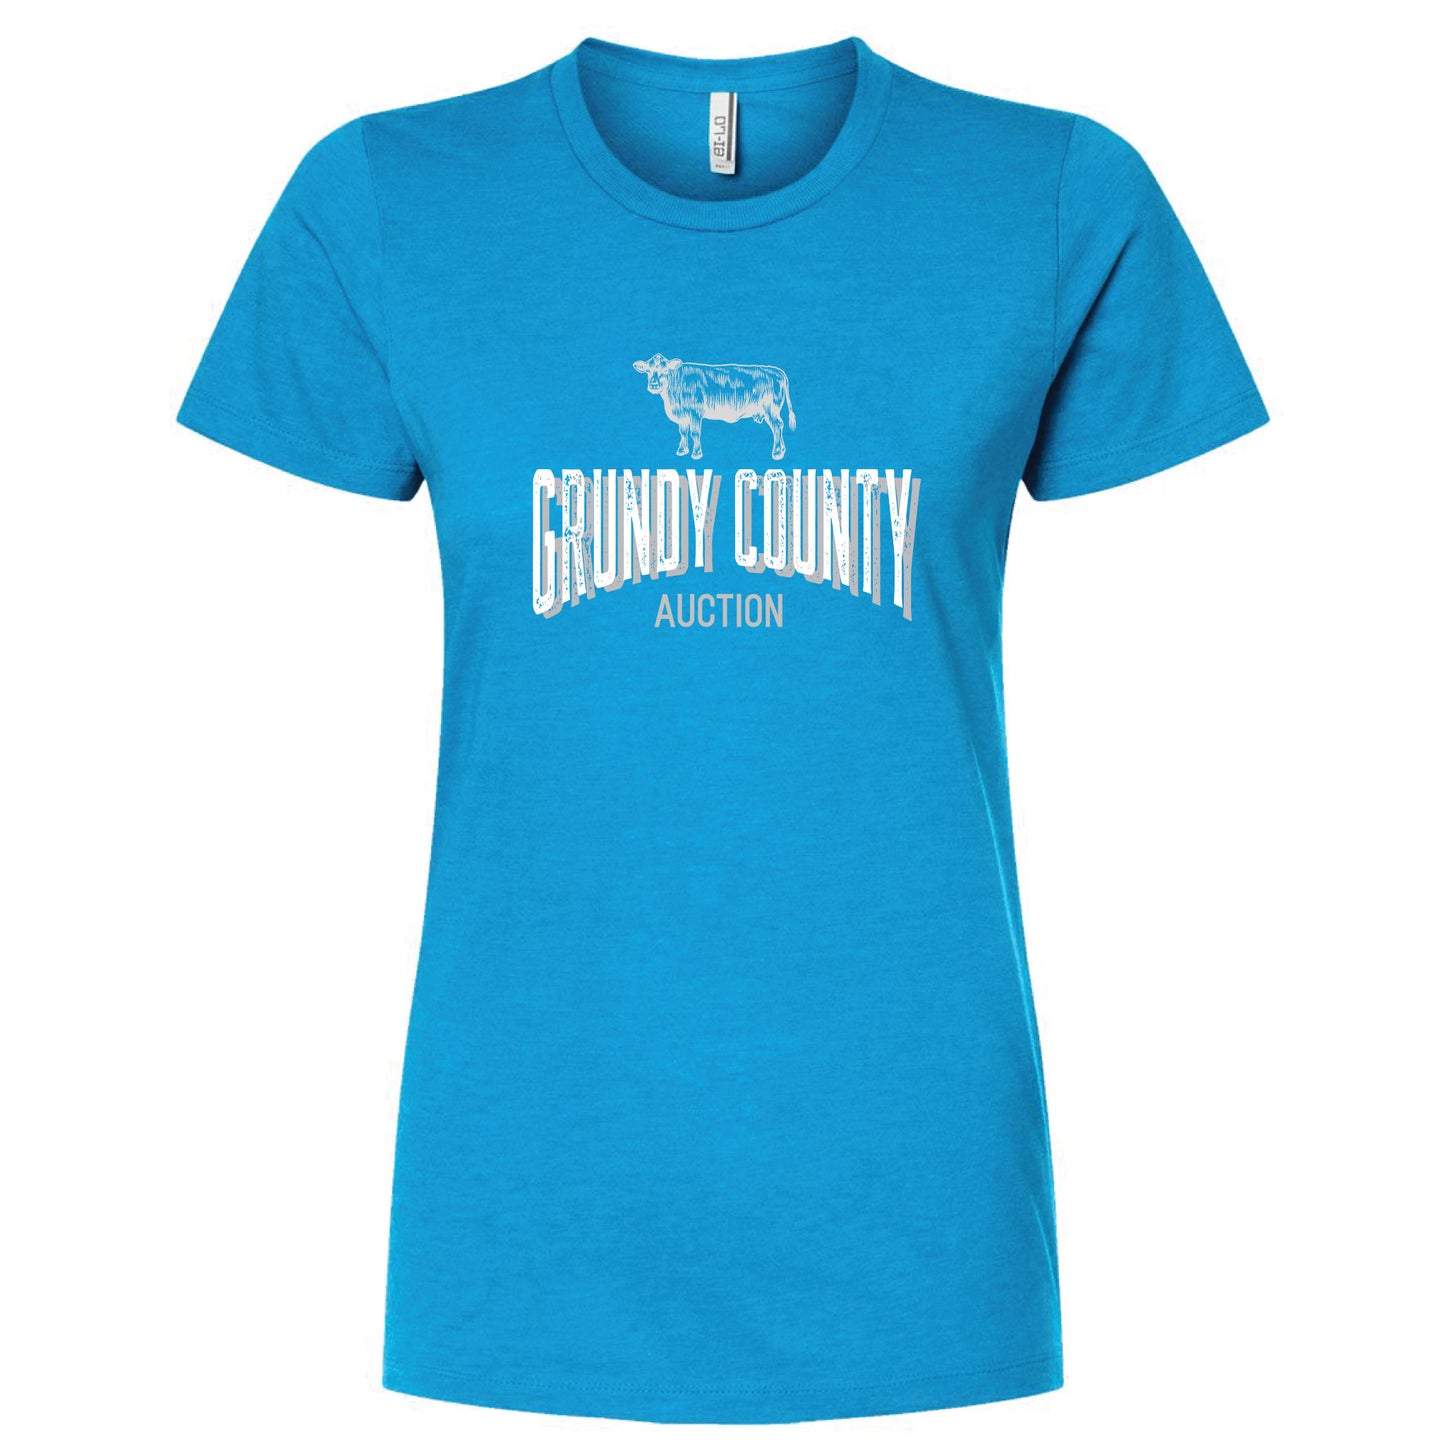 Grundy County Auction Women's Slim Fit T-Shirt